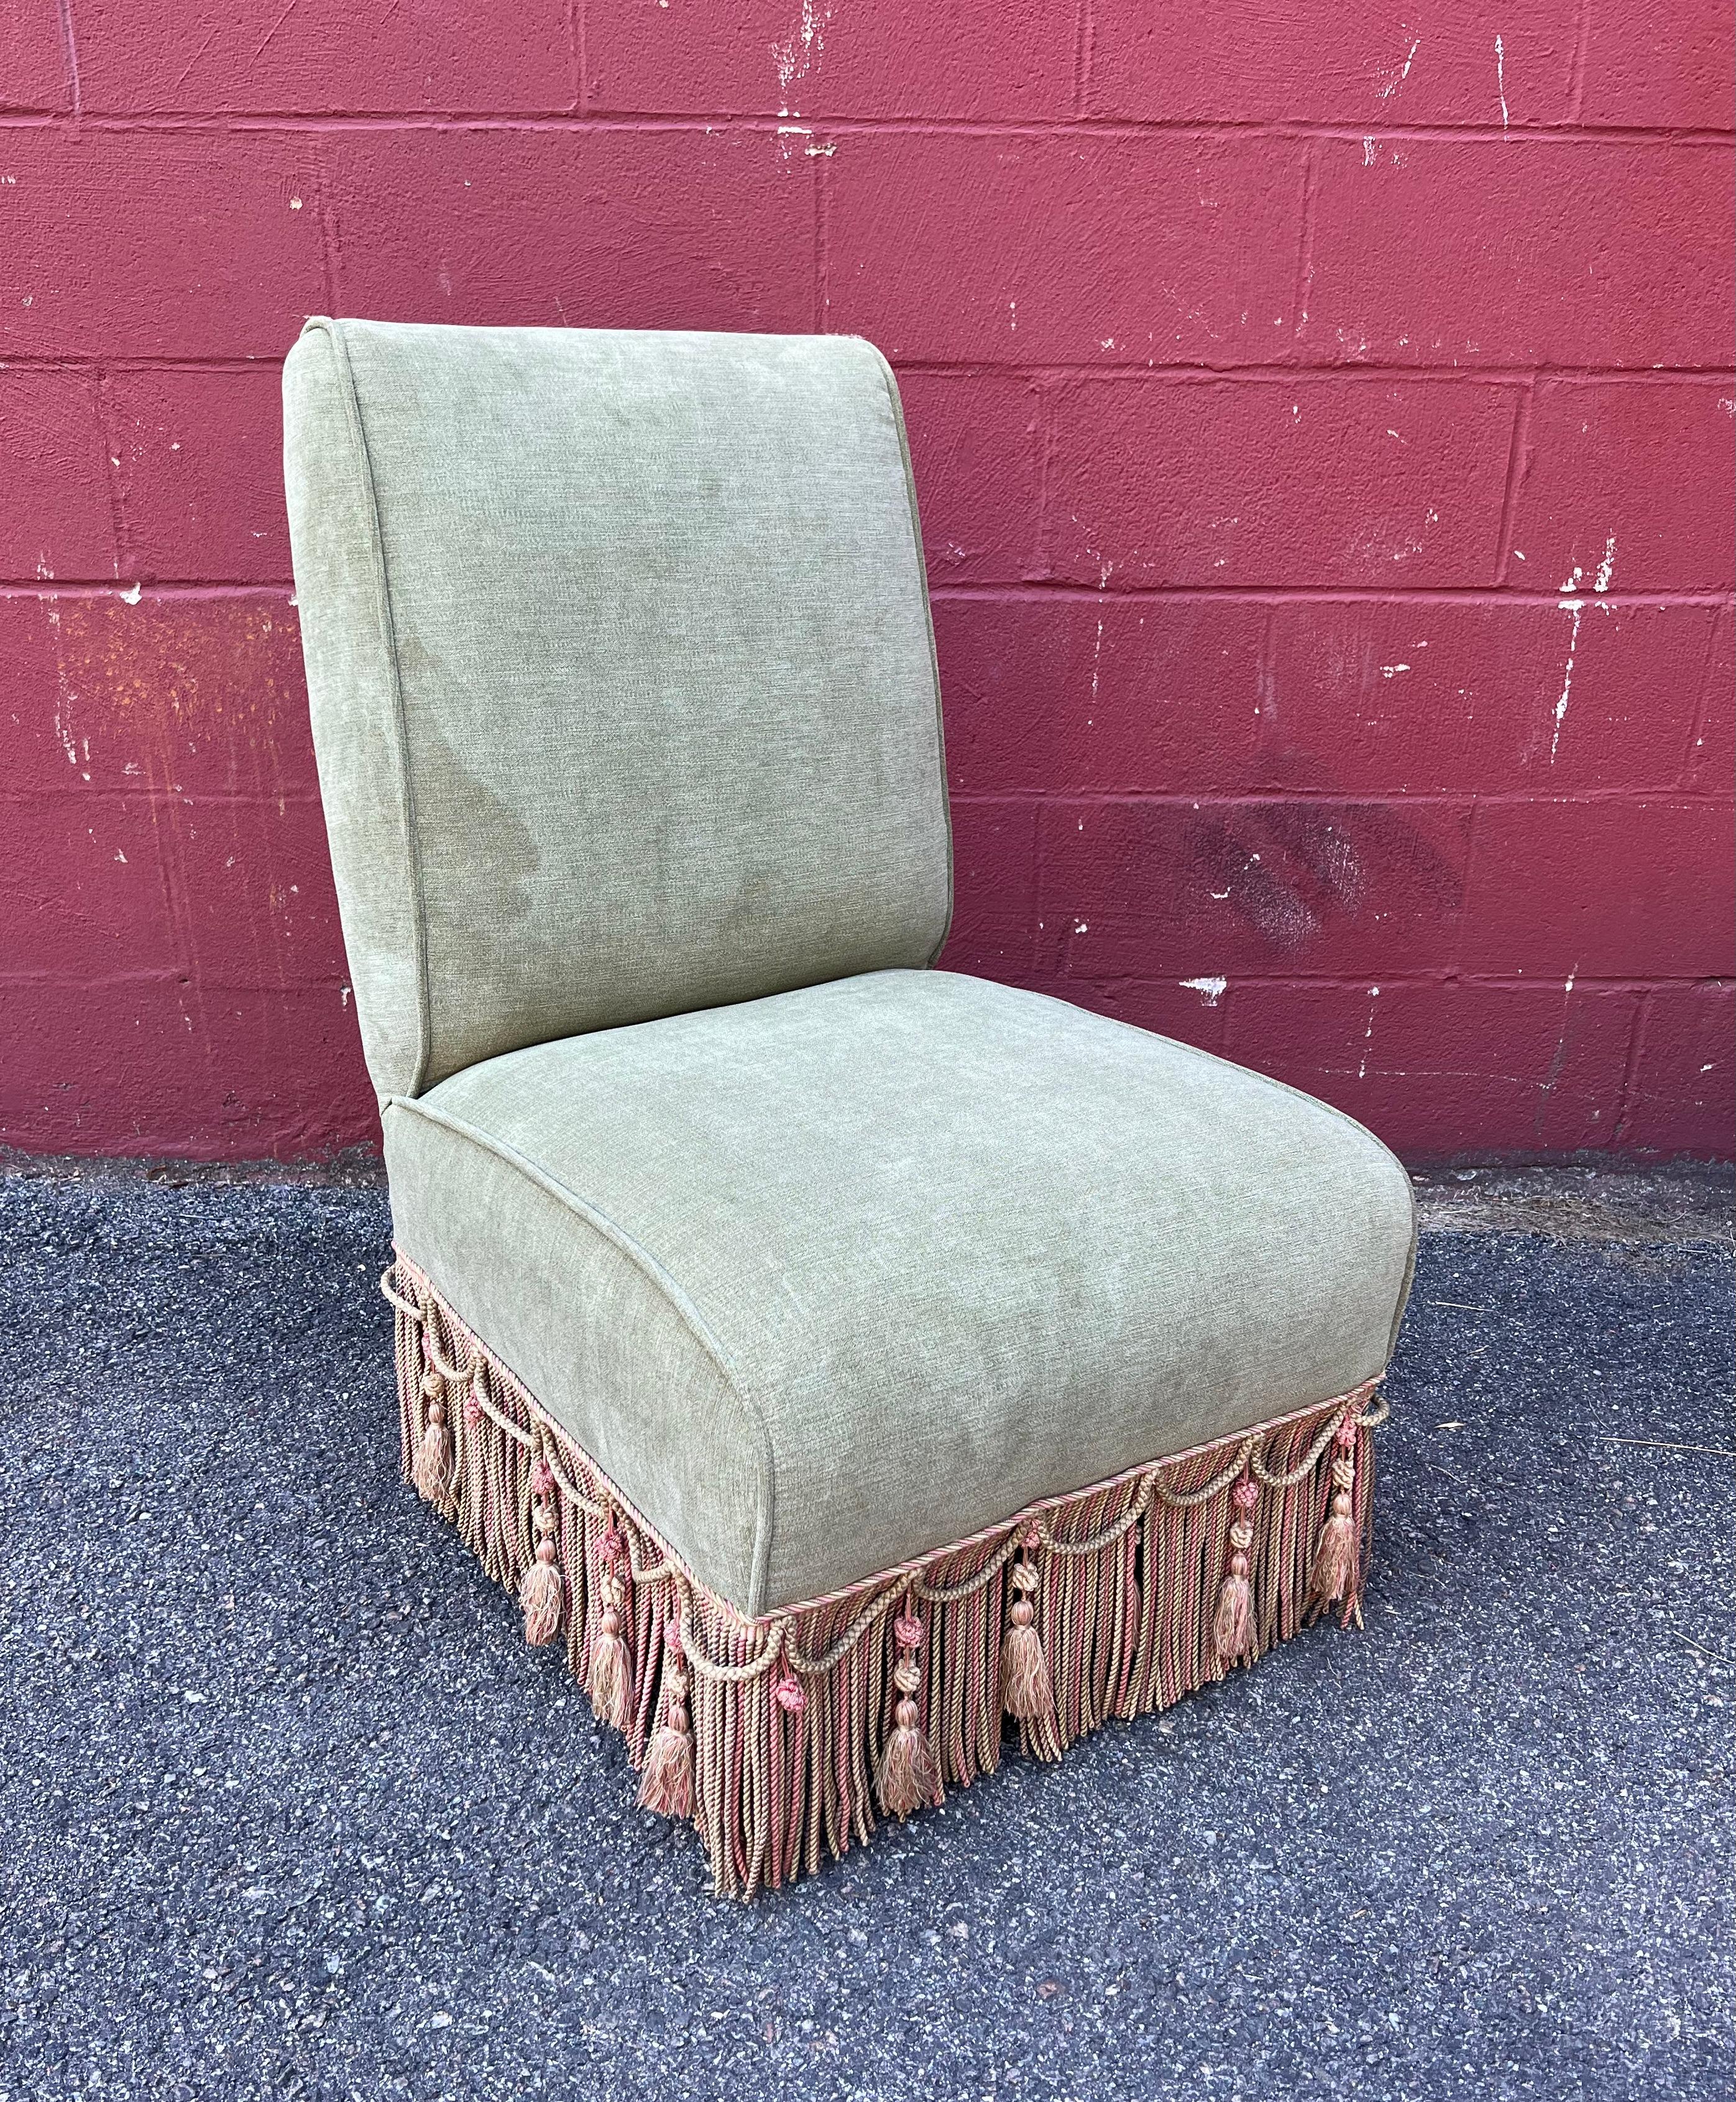 An elegant large scale French 1920s Napoleon III style slipper chair in pale green velvet. This French slipper chair is a magnificent piece of furniture. Upholstered in a pale green velvet, it boasts an elaborately trimmed design featuring